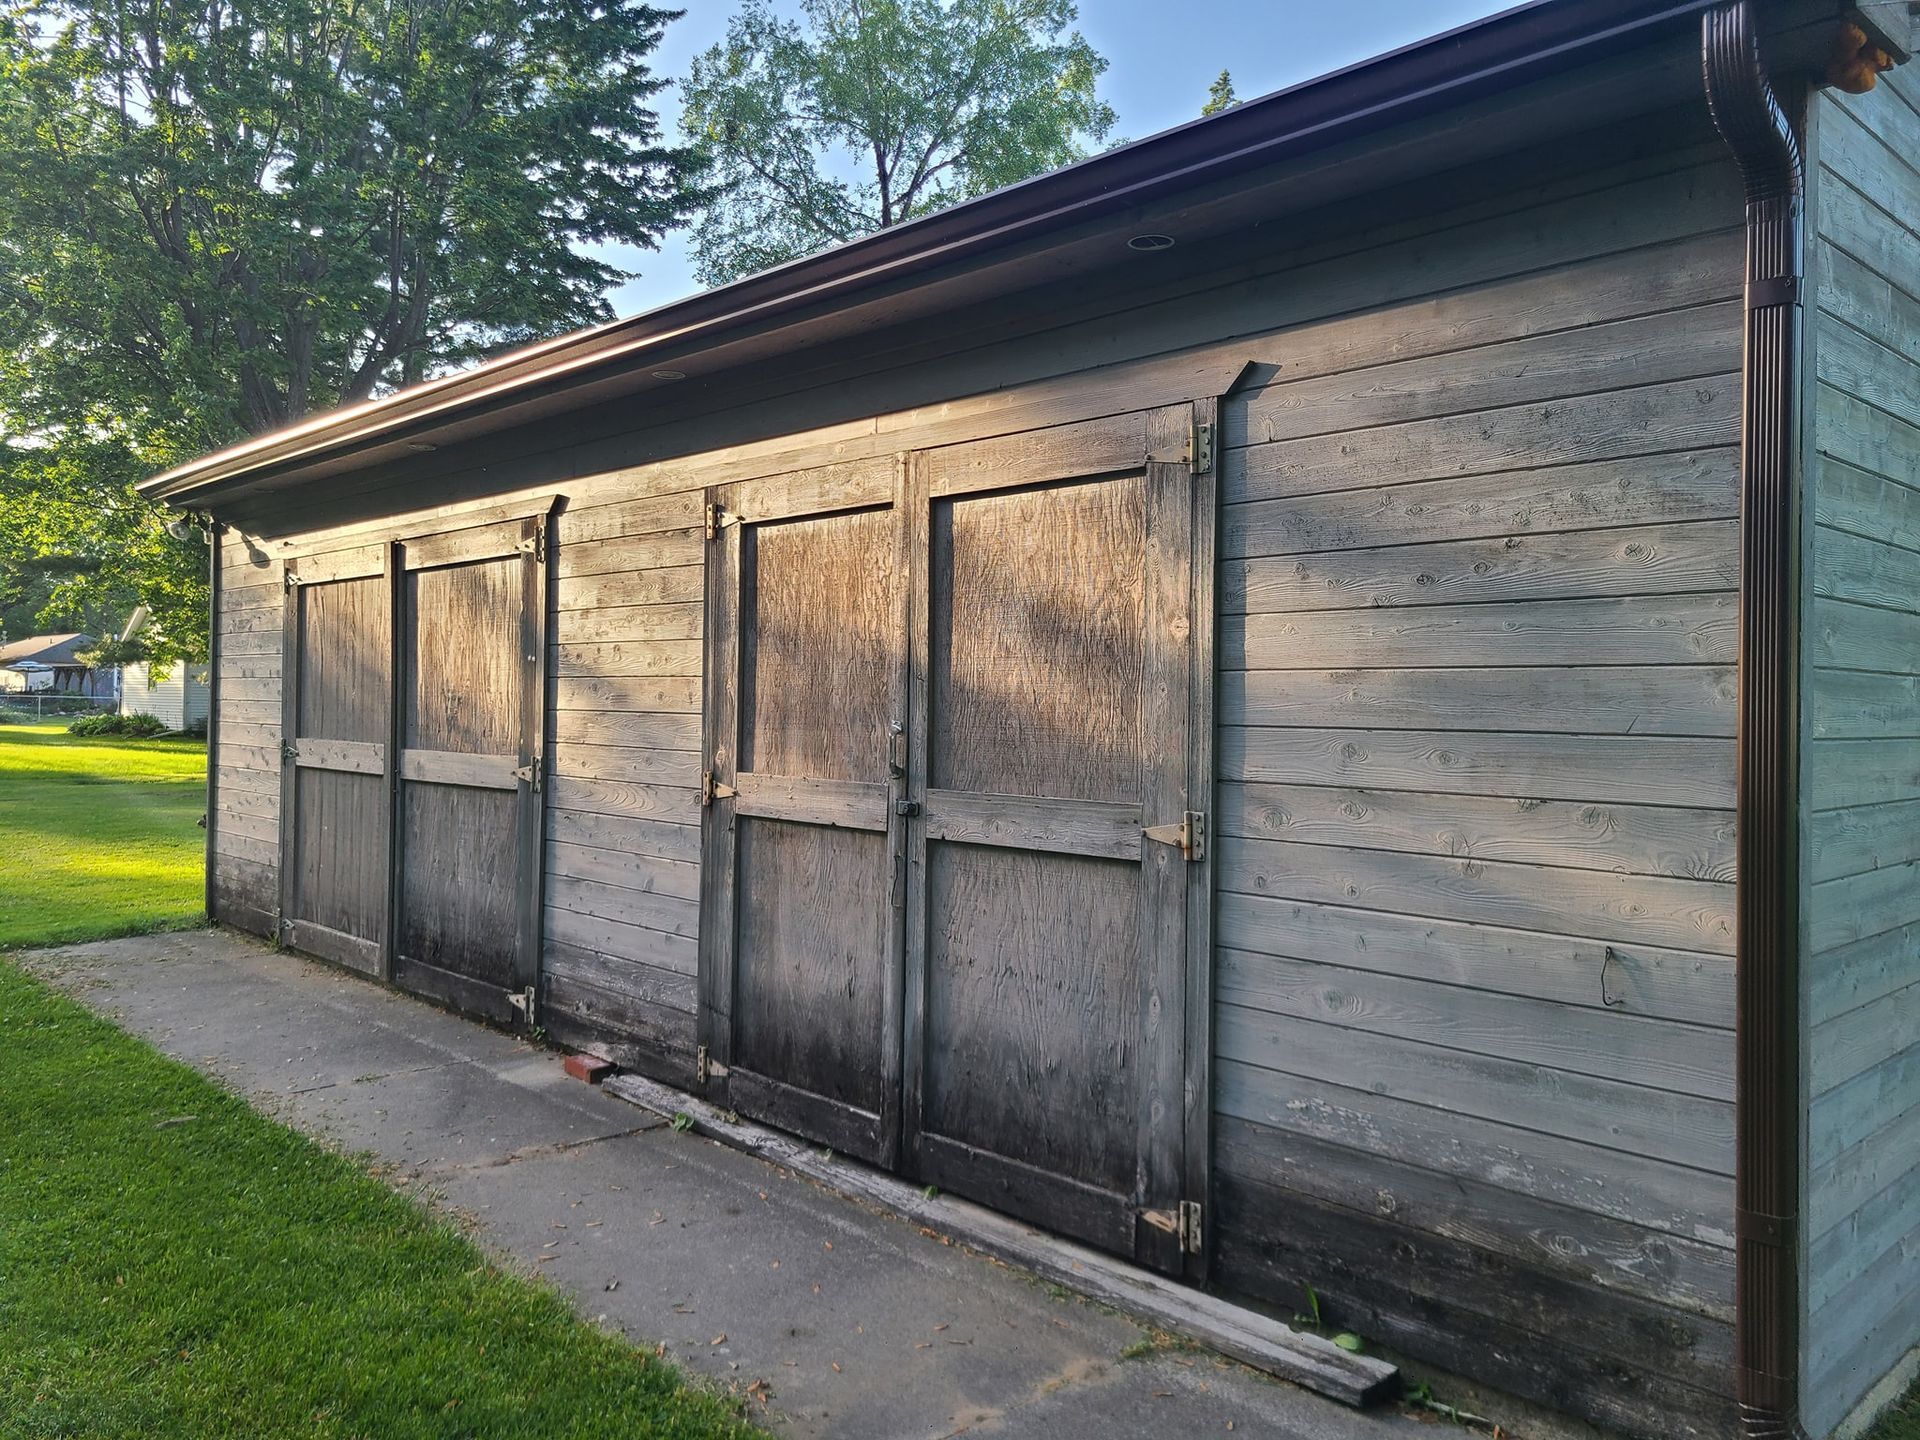 A row of wooden garage doors are lined up next to each other.